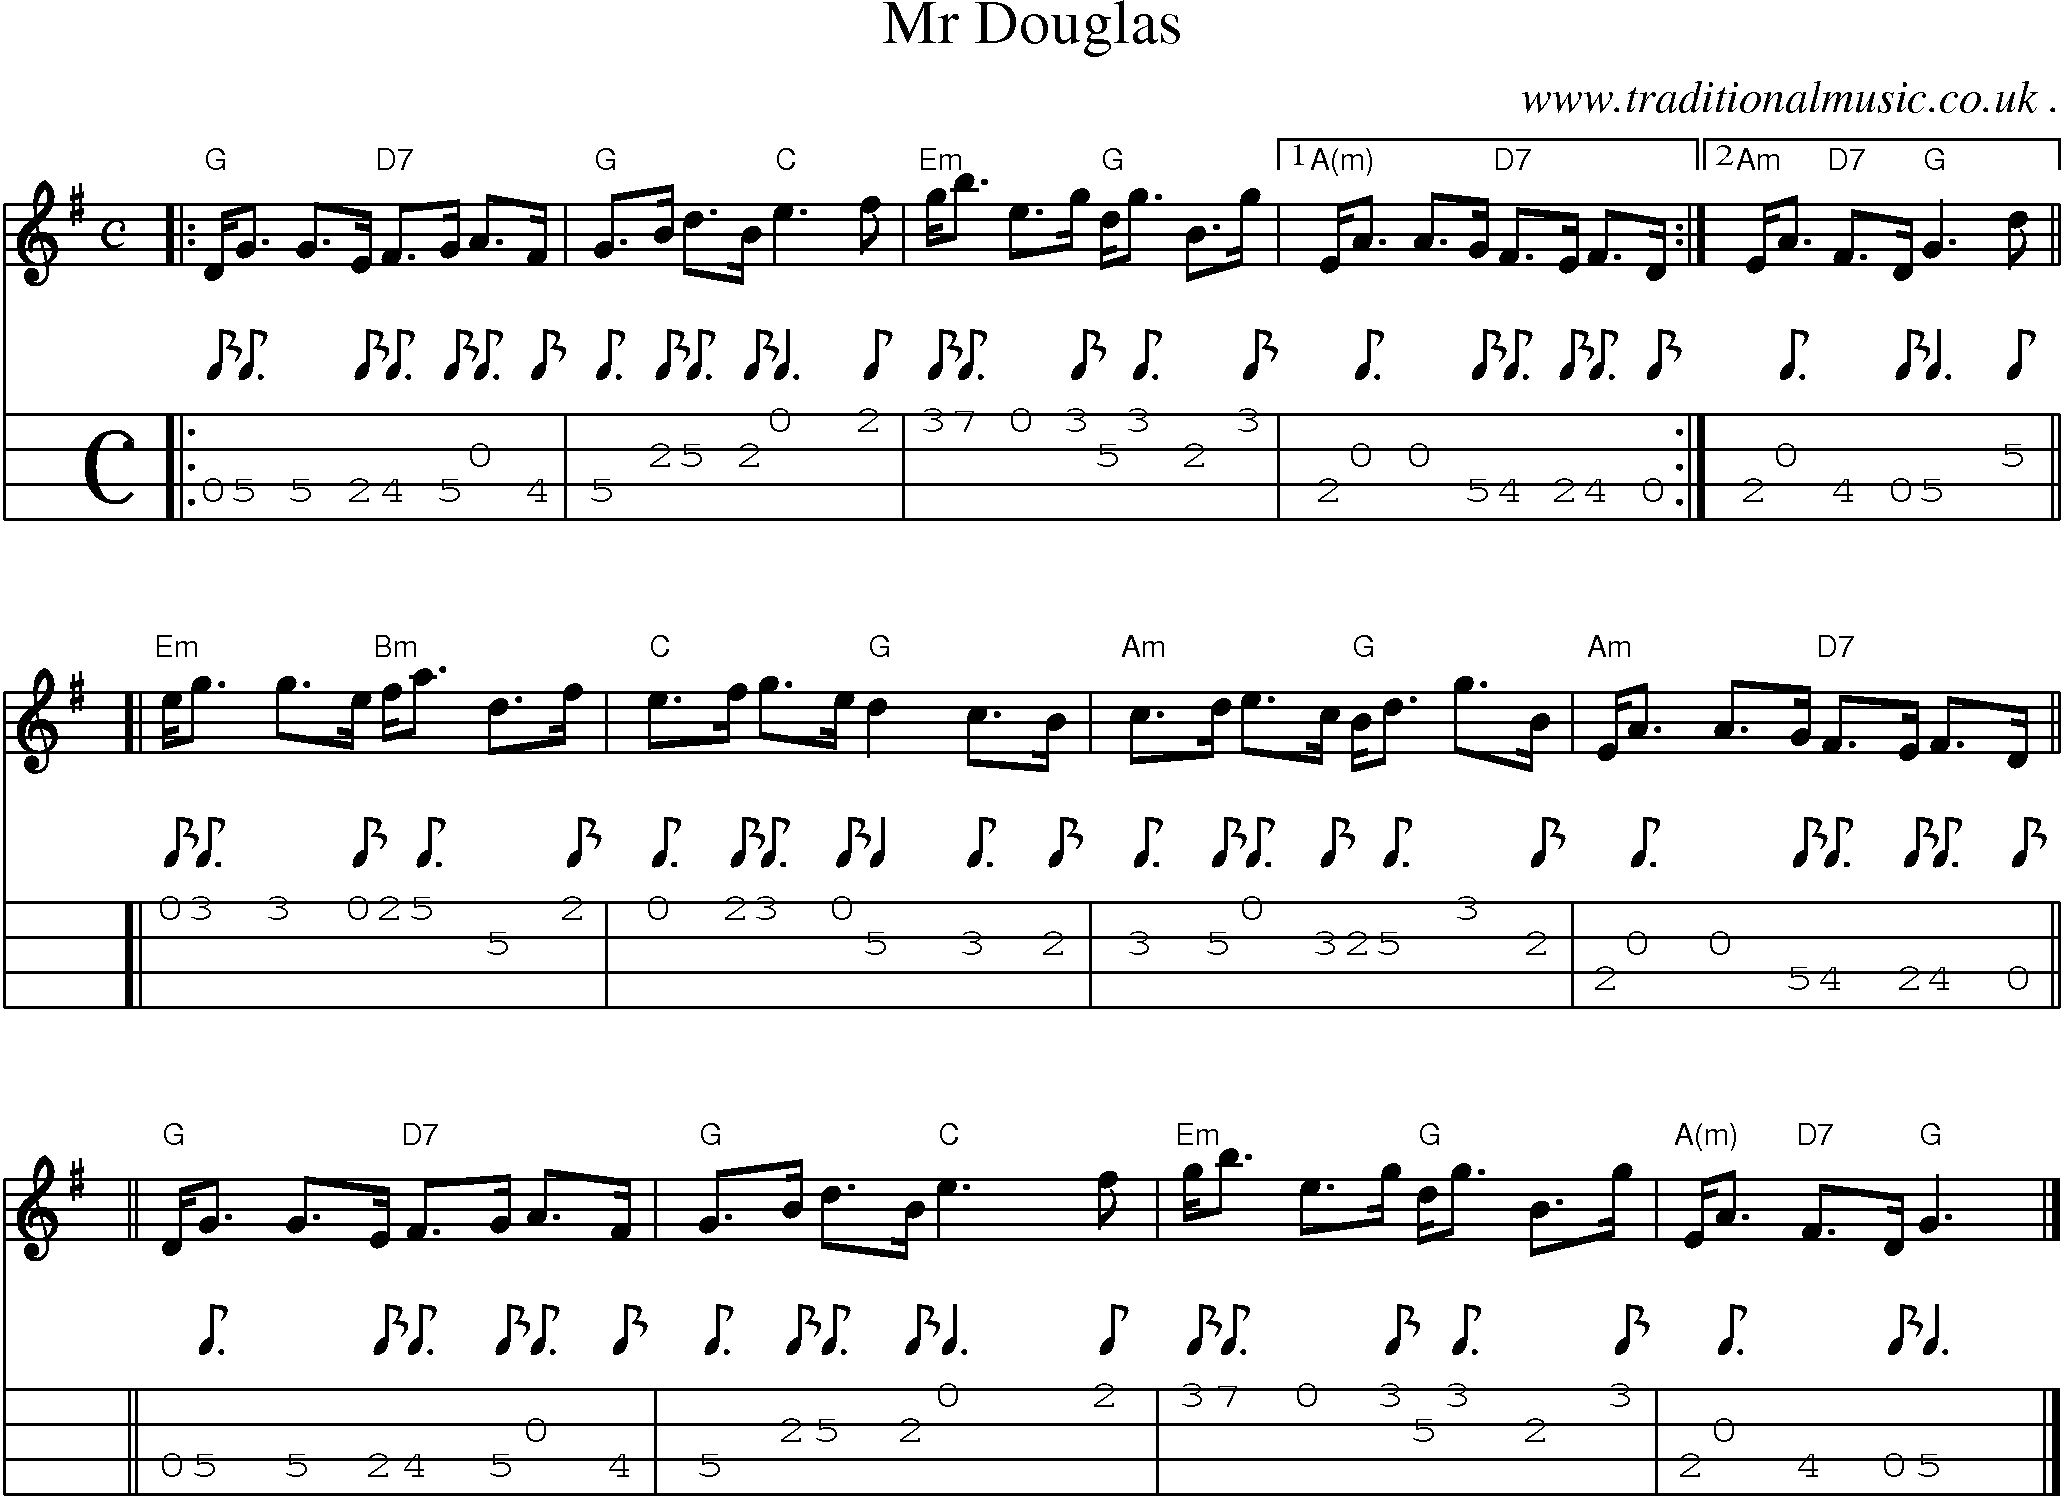 Sheet-music  score, Chords and Mandolin Tabs for Mr Douglas